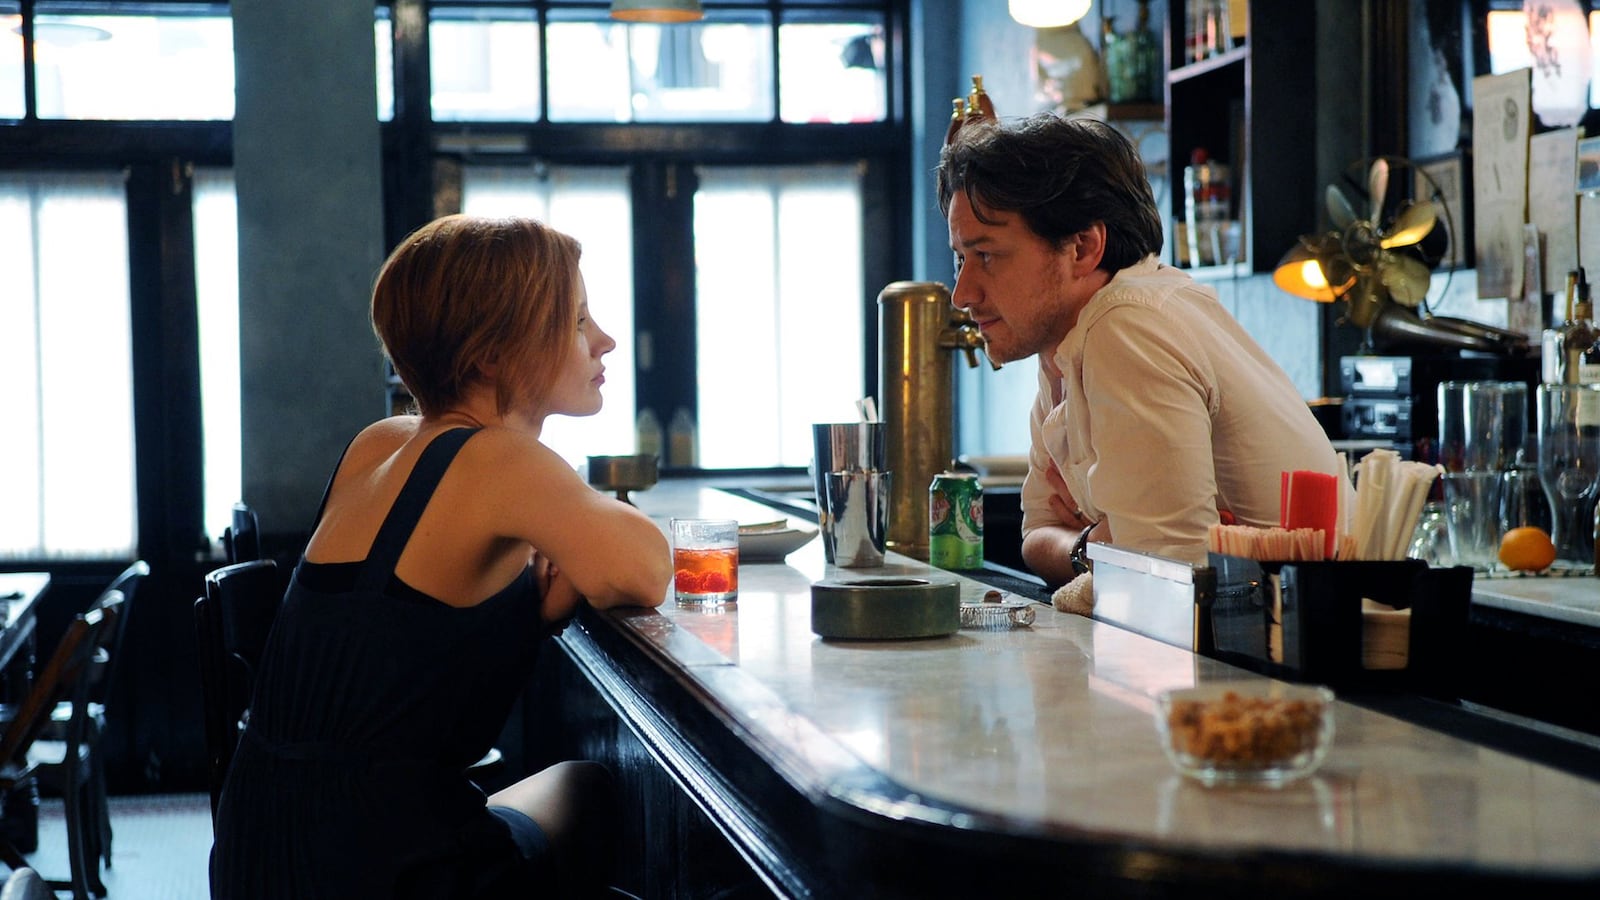 the-disappearance-of-eleanor-rigby-them-2014